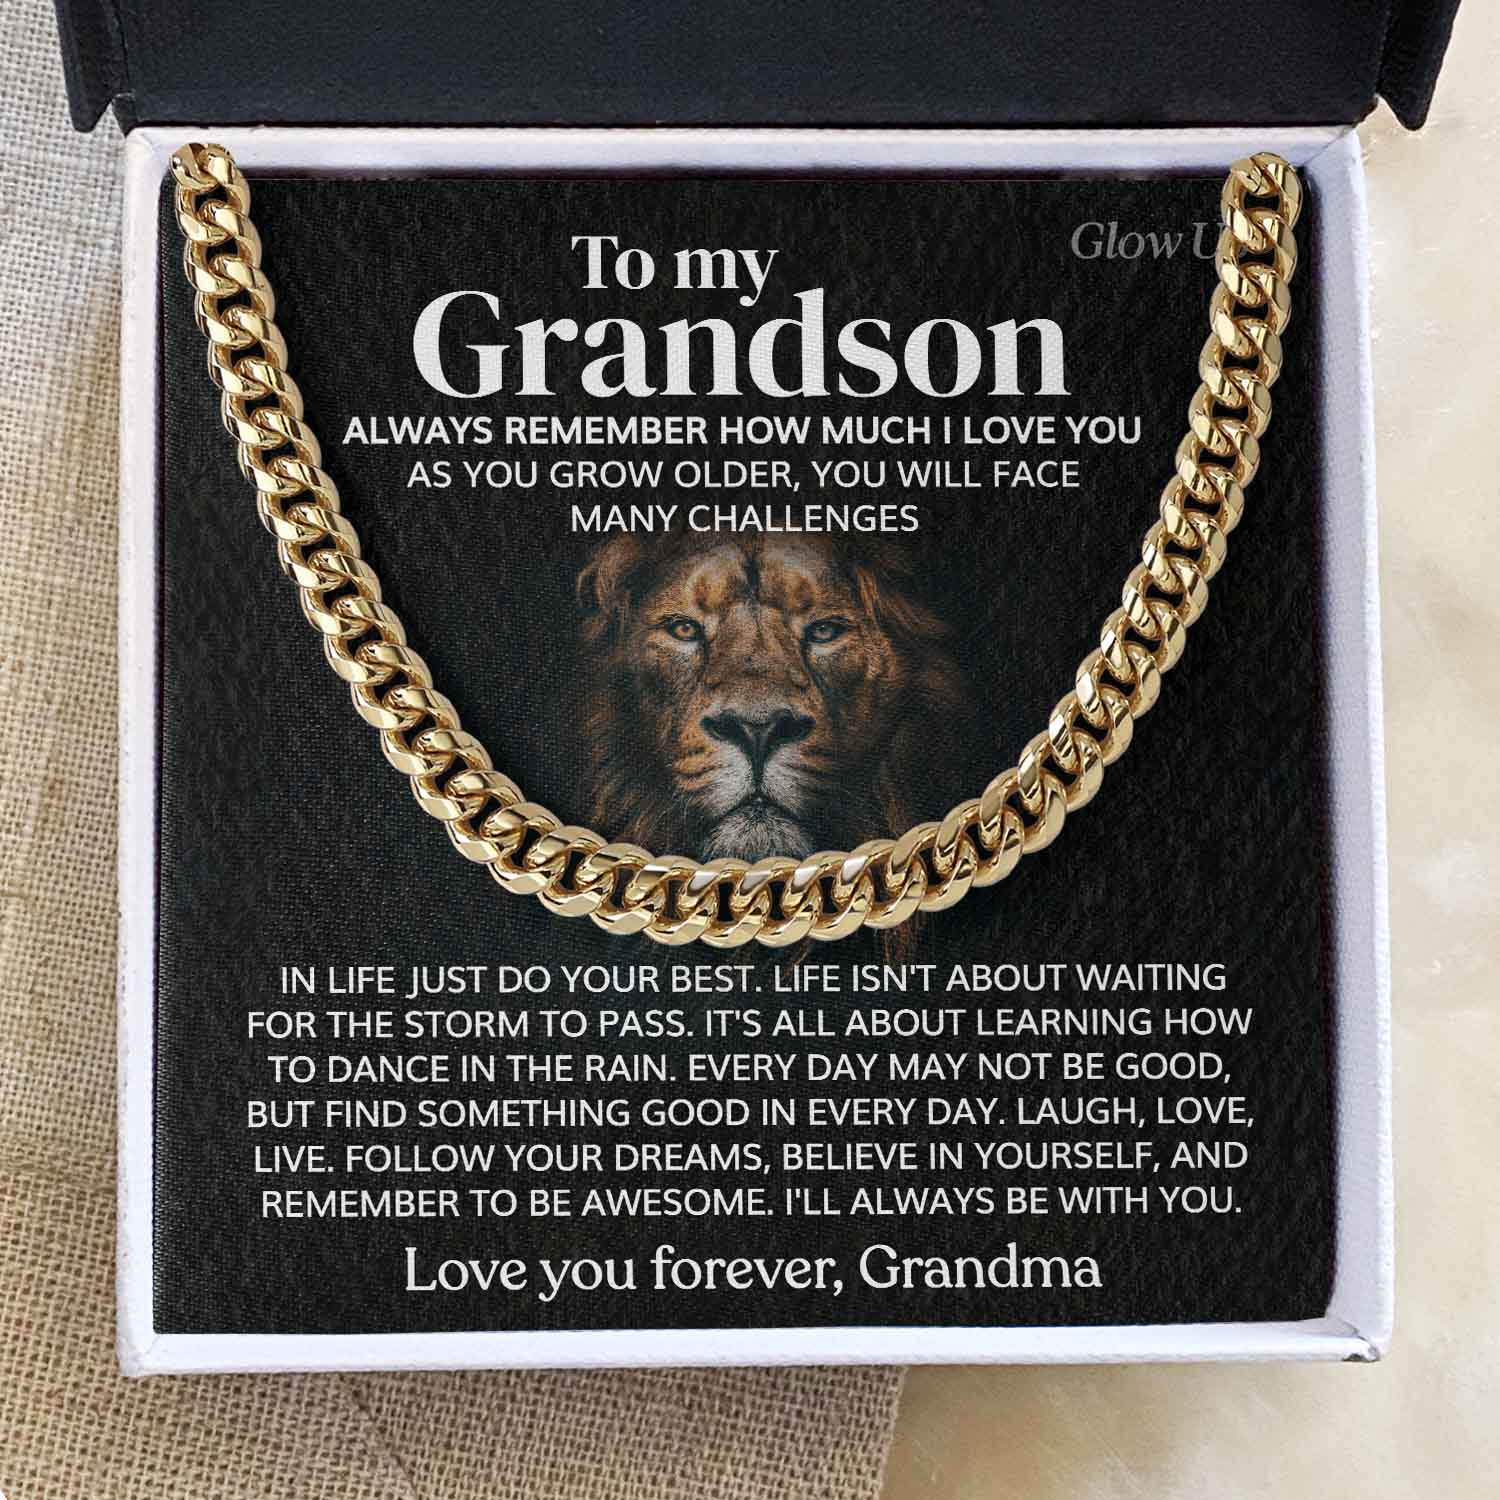 ShineOn Fulfillment Jewelry 14K Yellow Gold Finish / Twd-Toned Box To my Grandson - In life just do your best - Cuban LInk Chain